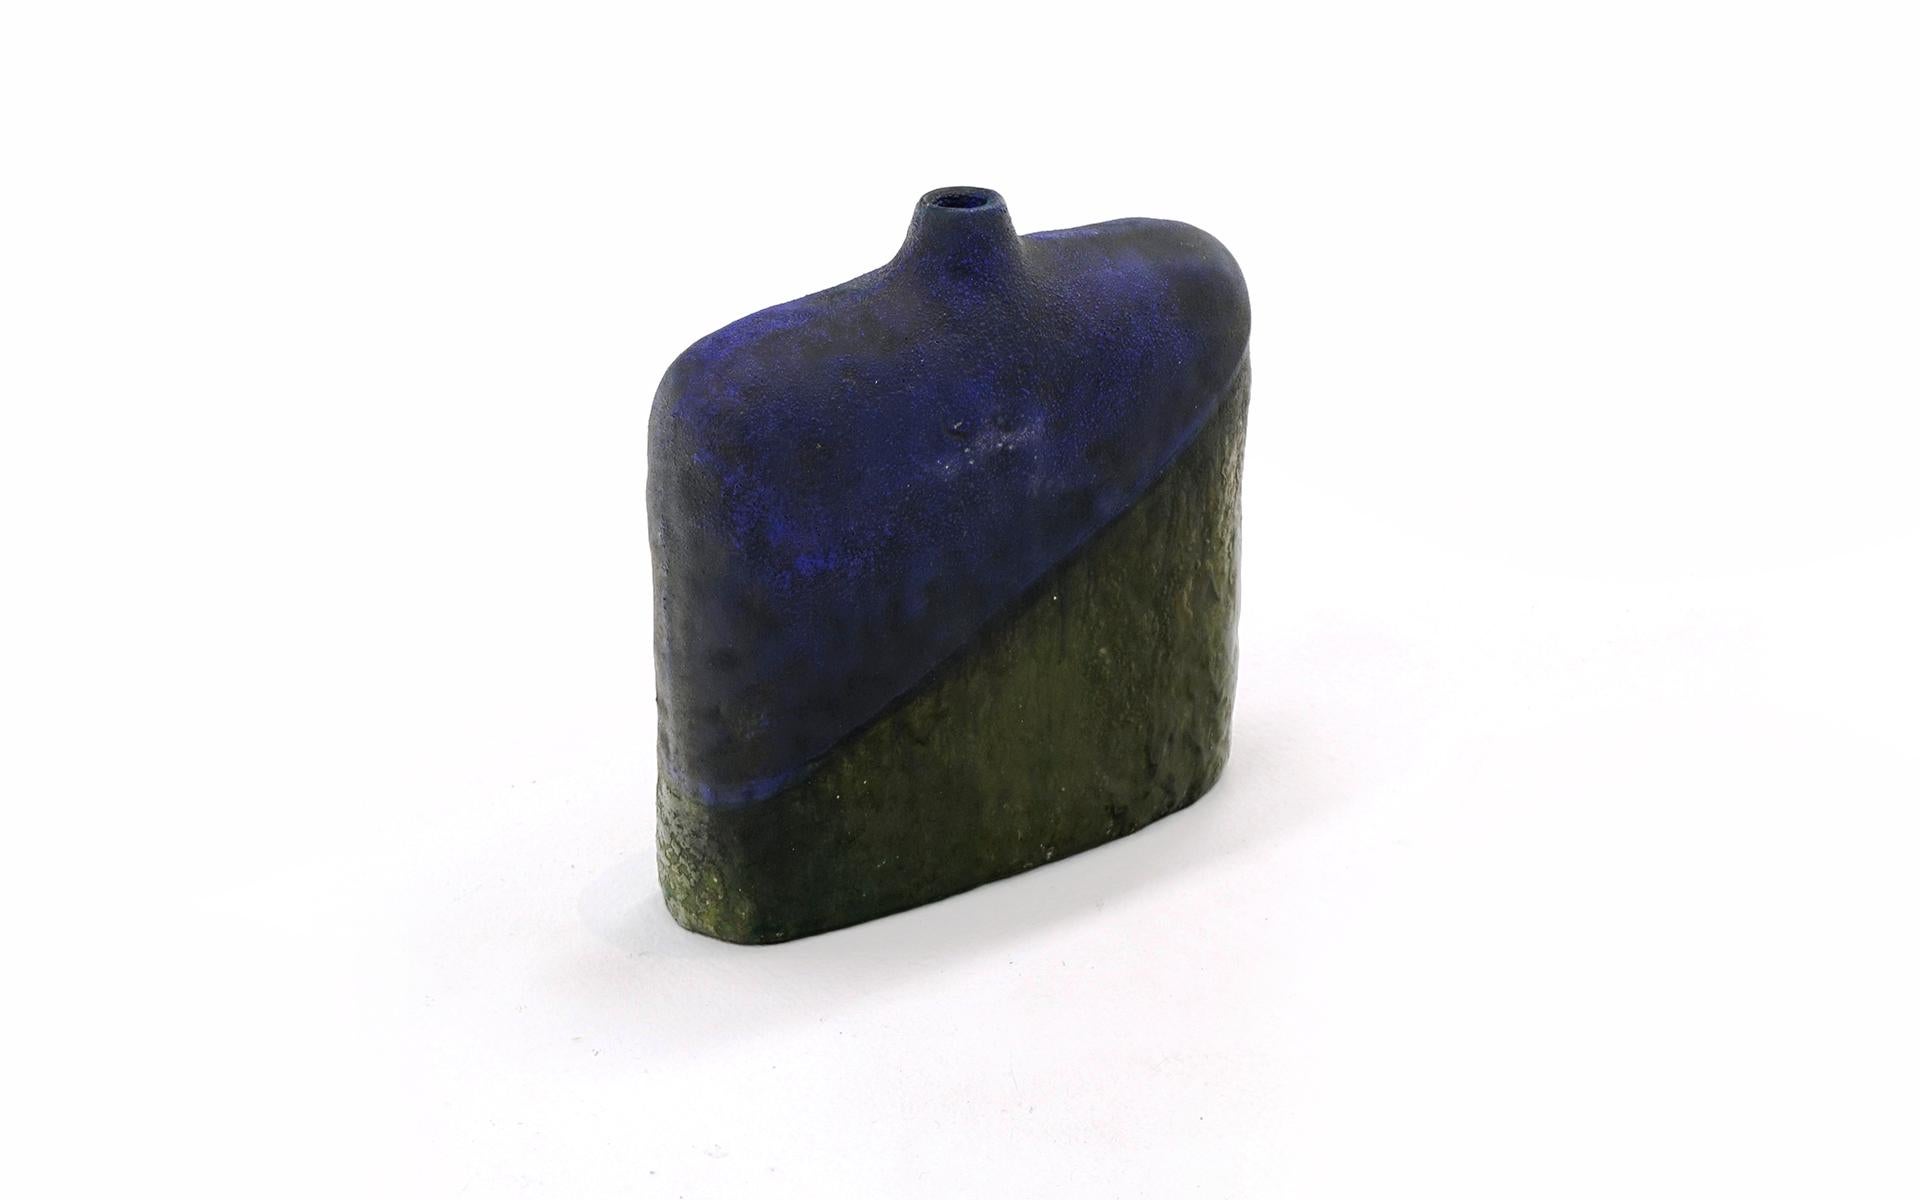 Marcello Fantoni Vase for Raymor, Italy c. 1960 glazed earthenware. No chips, cracks or repairs. Beautiful piece. Signed to underside 'Fantoni Italy for Raymor'.